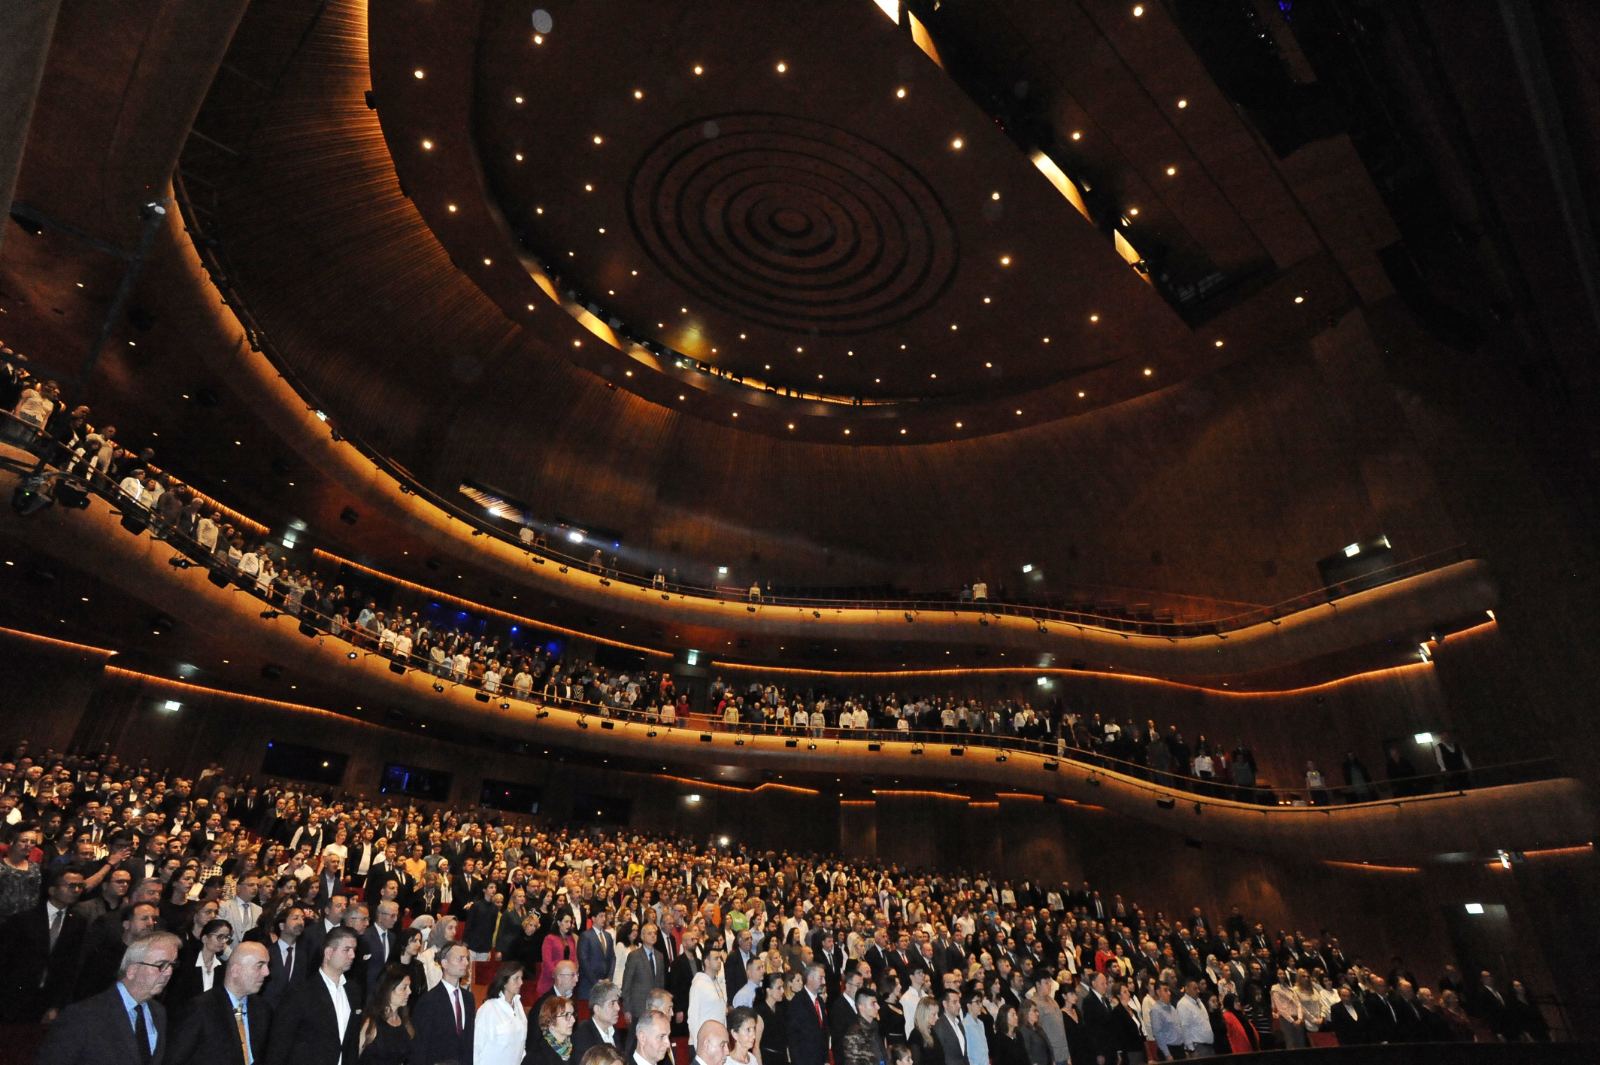 Over two thousand people in Istanbul applauded the opera "Tosca"